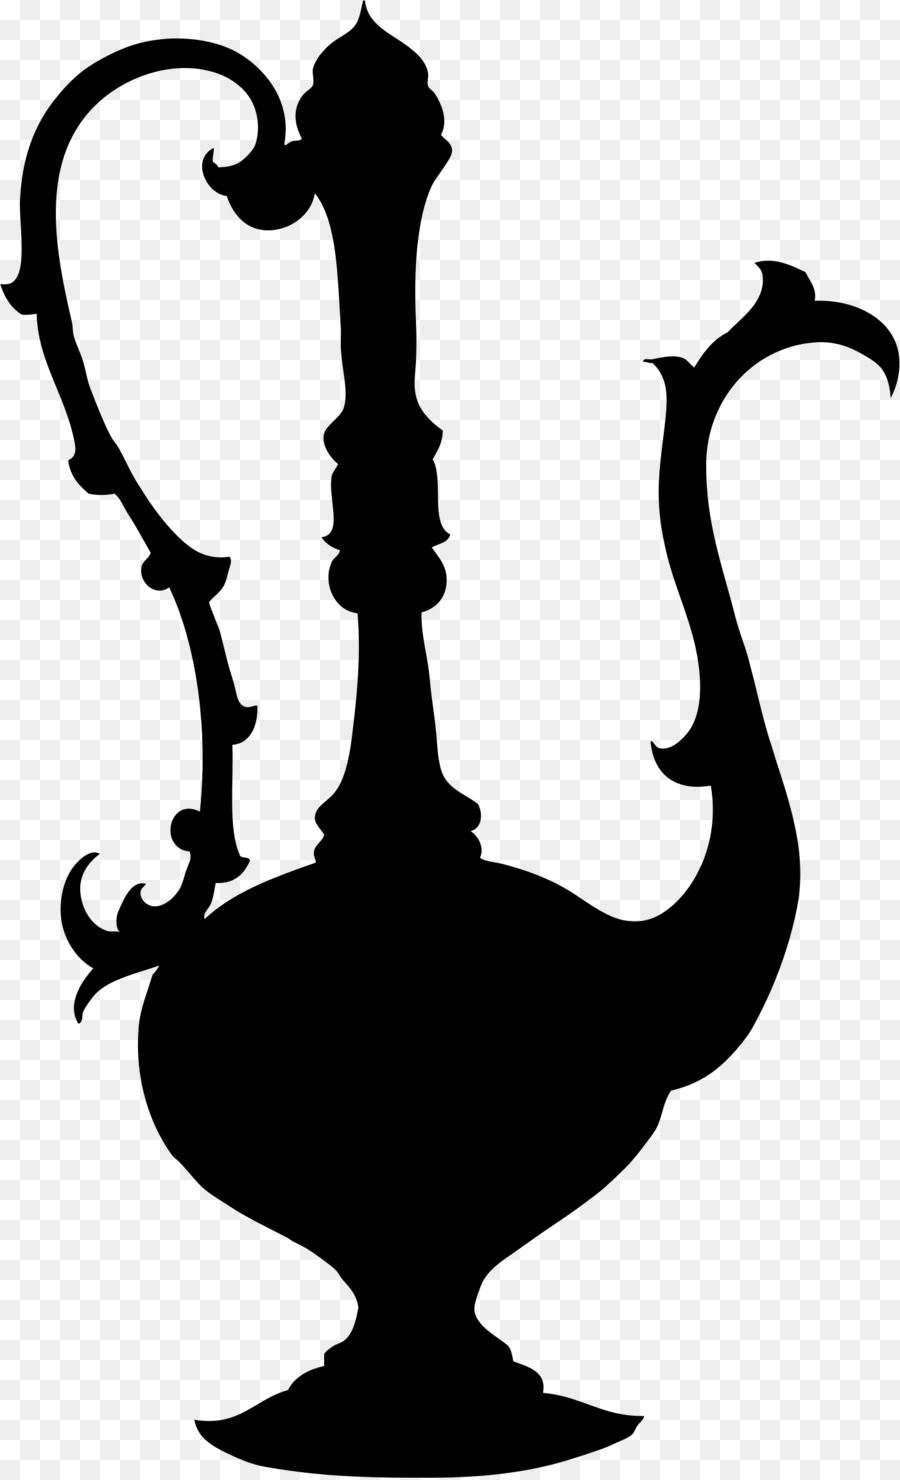 Drawing Jug Ornament Clip art - VINTAGE Silhouette png download - 1402*2303 - Free Transparent Drawing png Download.